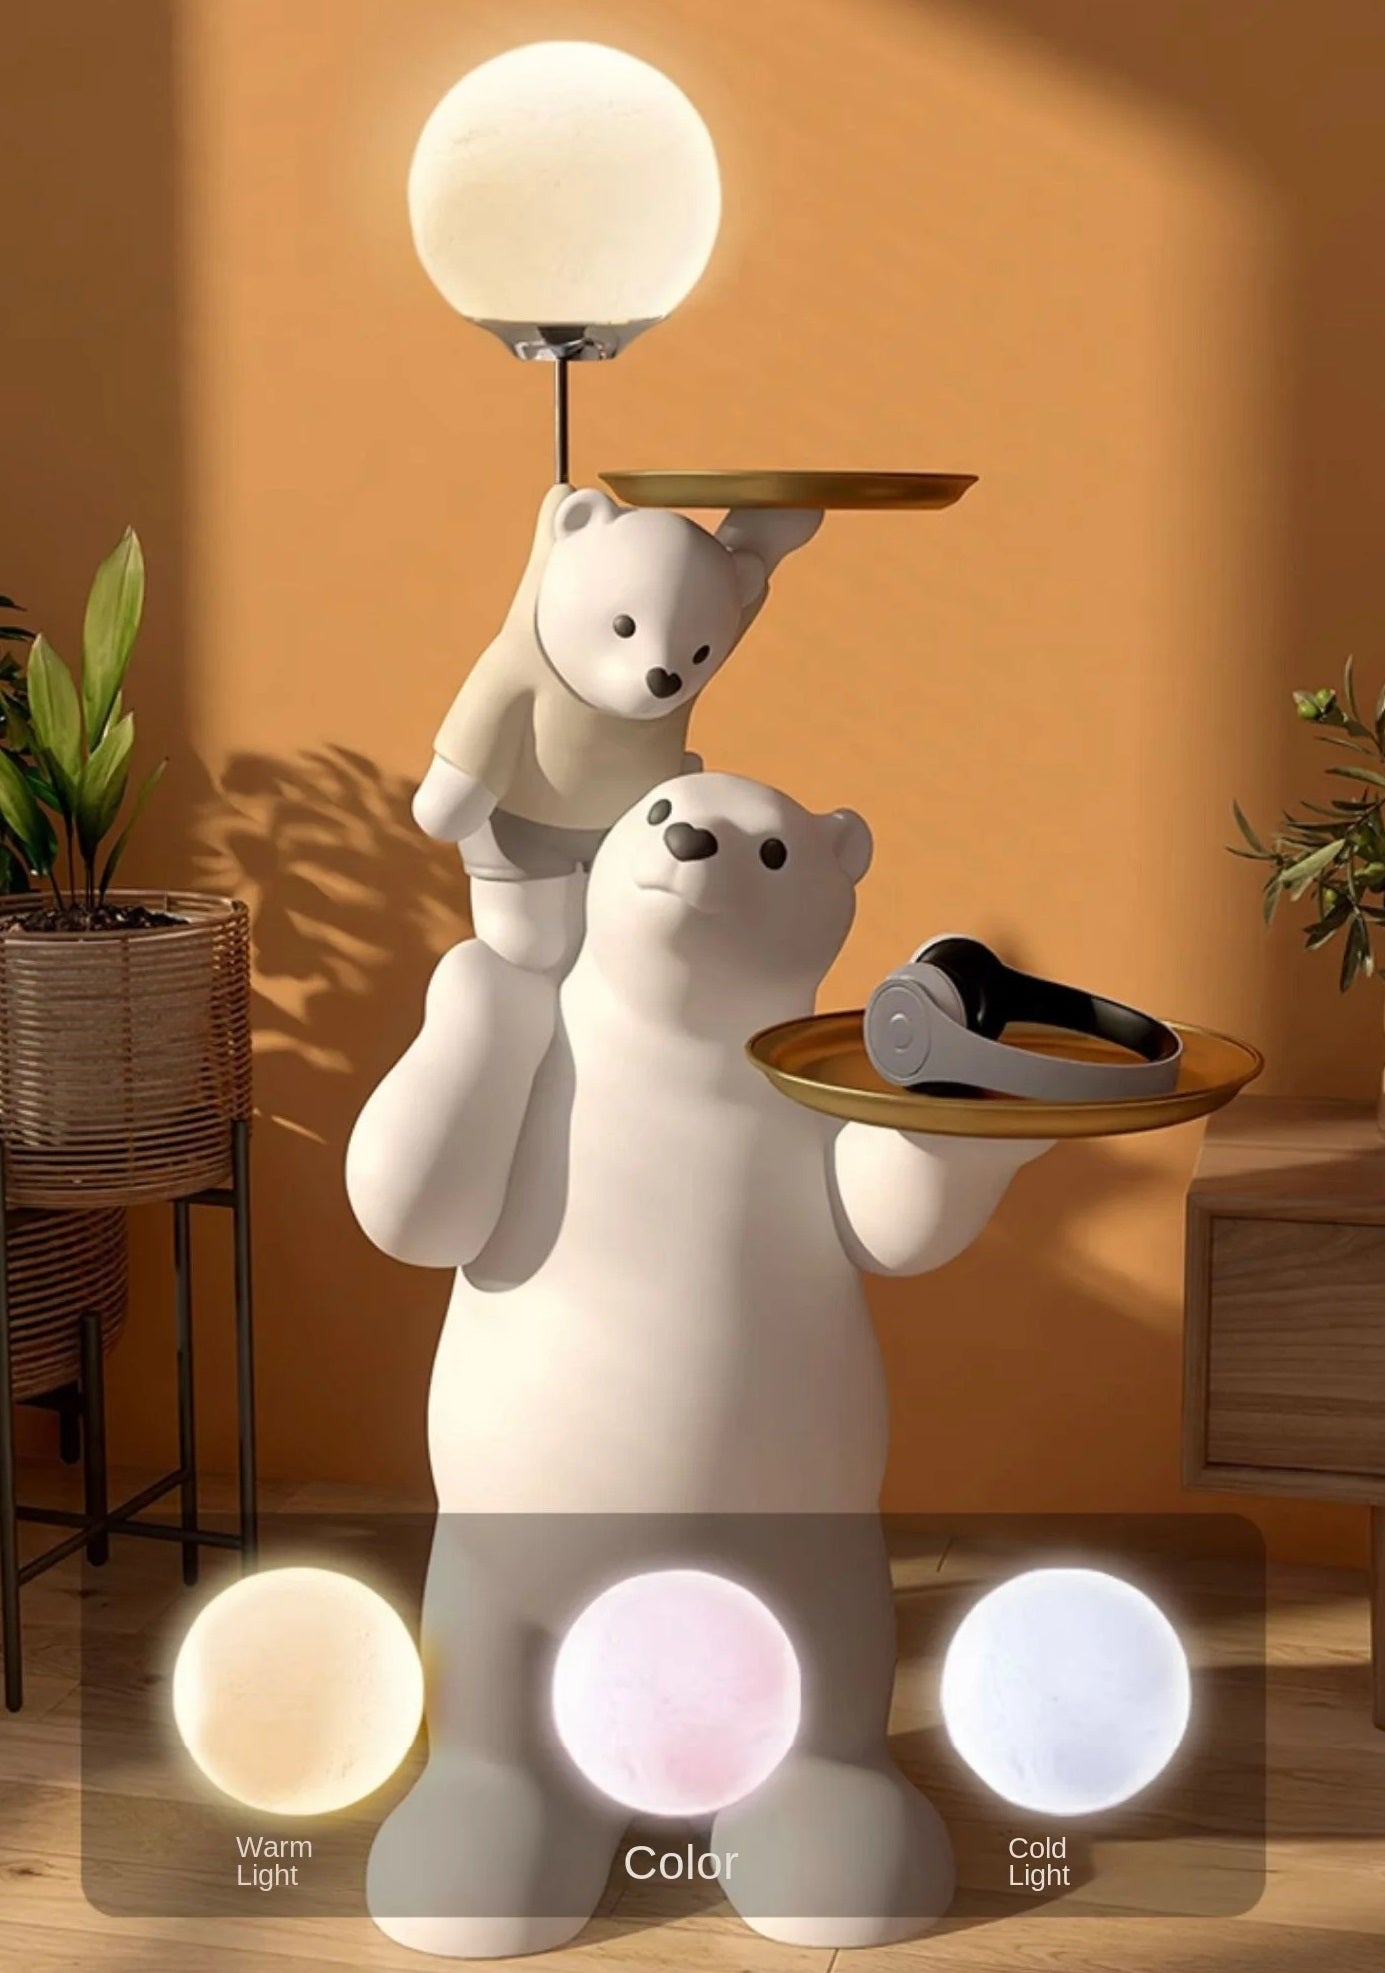 Decorative lamp featuring a polar bear with a smaller bear balancing a luminous globe on its nose, set against a warm orange background with samples of light temperatures shown below, perfect as a furniture piece for home decoration.